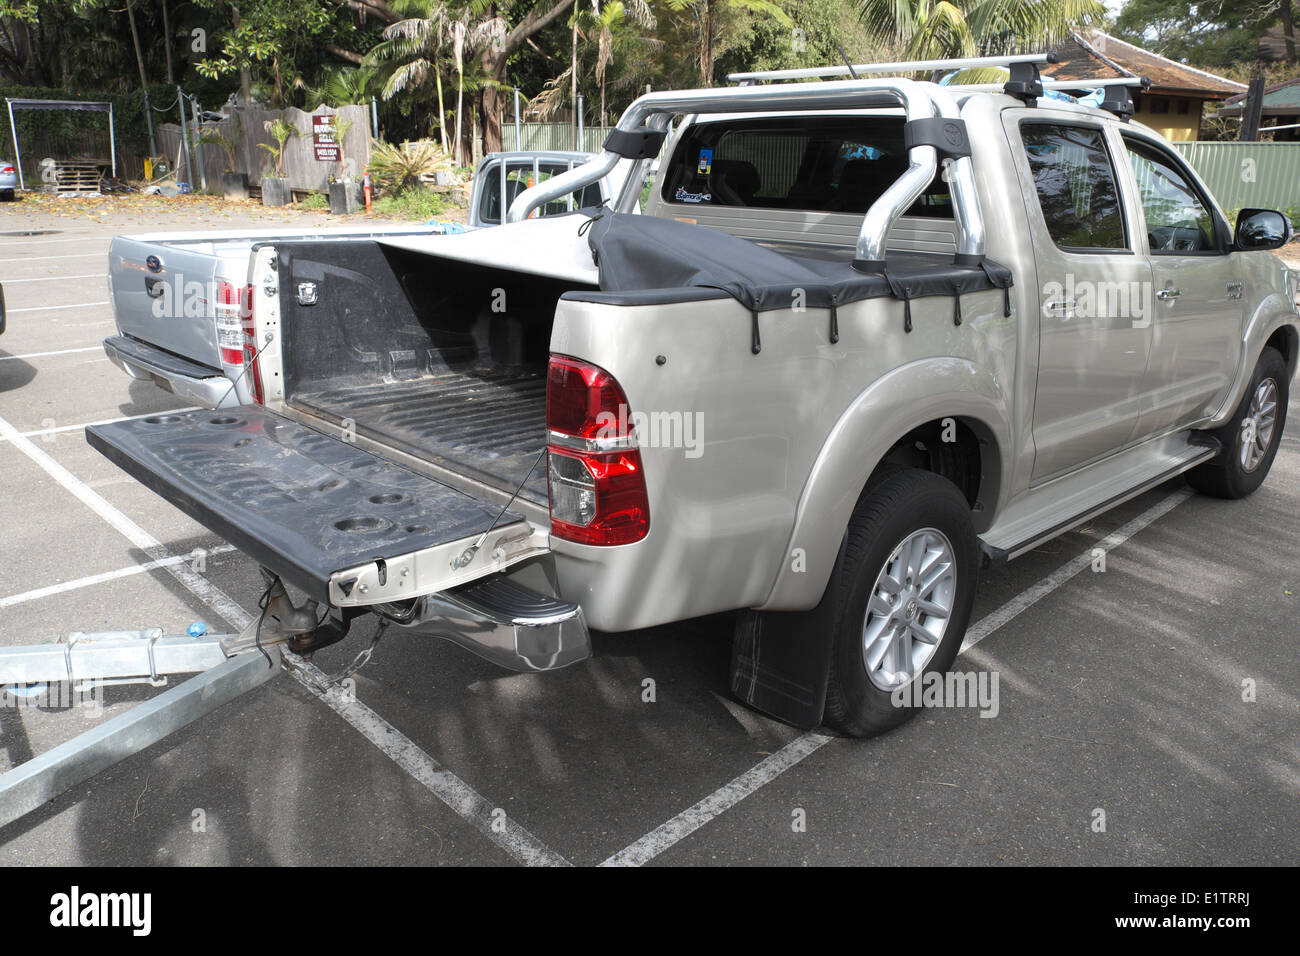 Toyota ute utility vehicle in Sydney with rear tray open and platform lowered,NSW,Australia Stock Photo